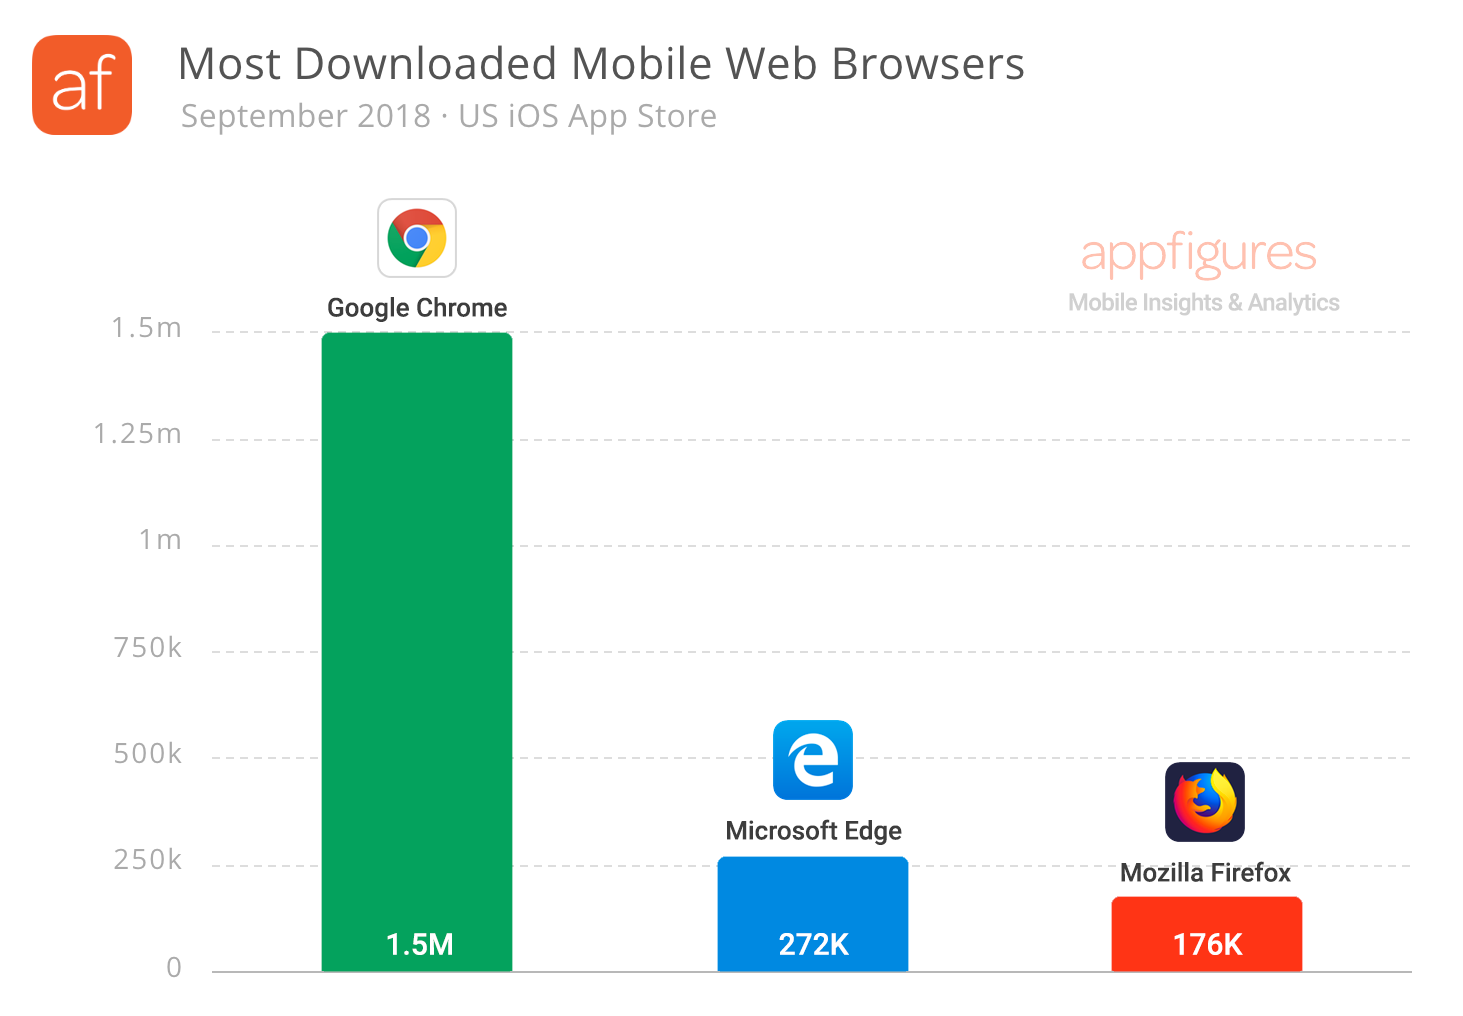 The most downloaded mobile web browsers for iOS in the U.S. United States (September 2018)